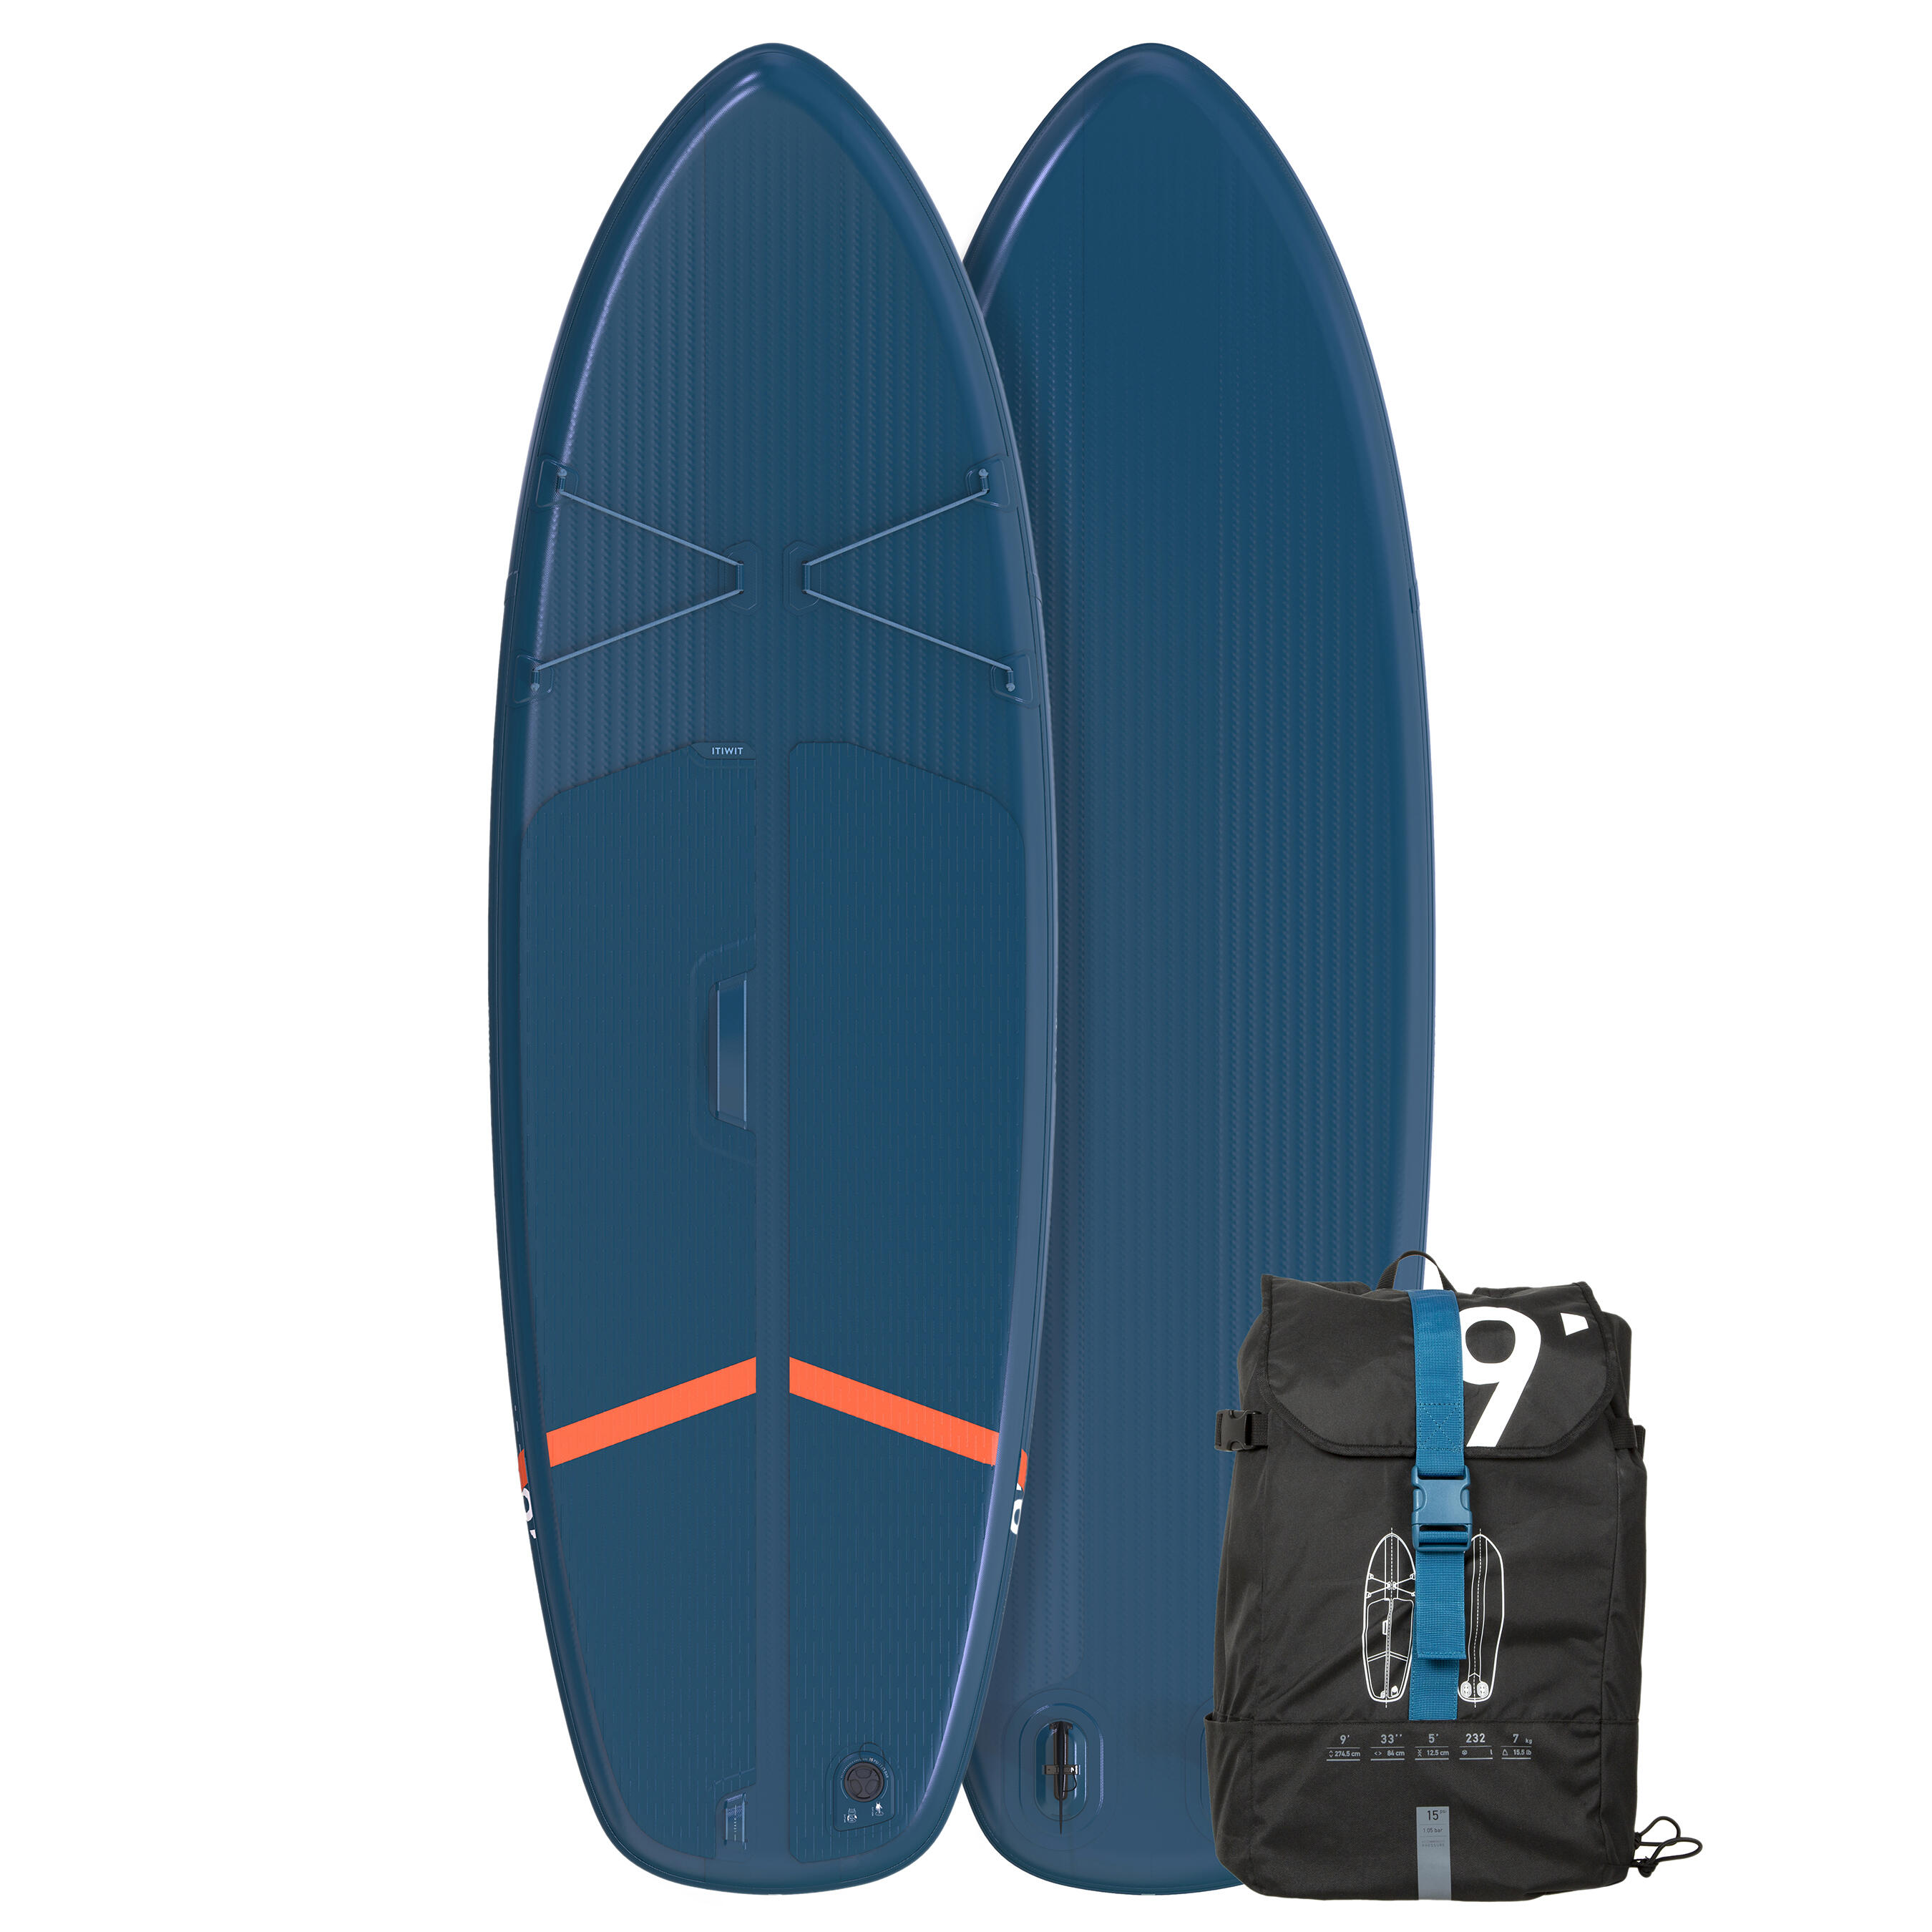 ITIWIT 100 COMPACT 9FT TOURING INFLATABLE STAND-UP PADDLEBOARD - BLUE